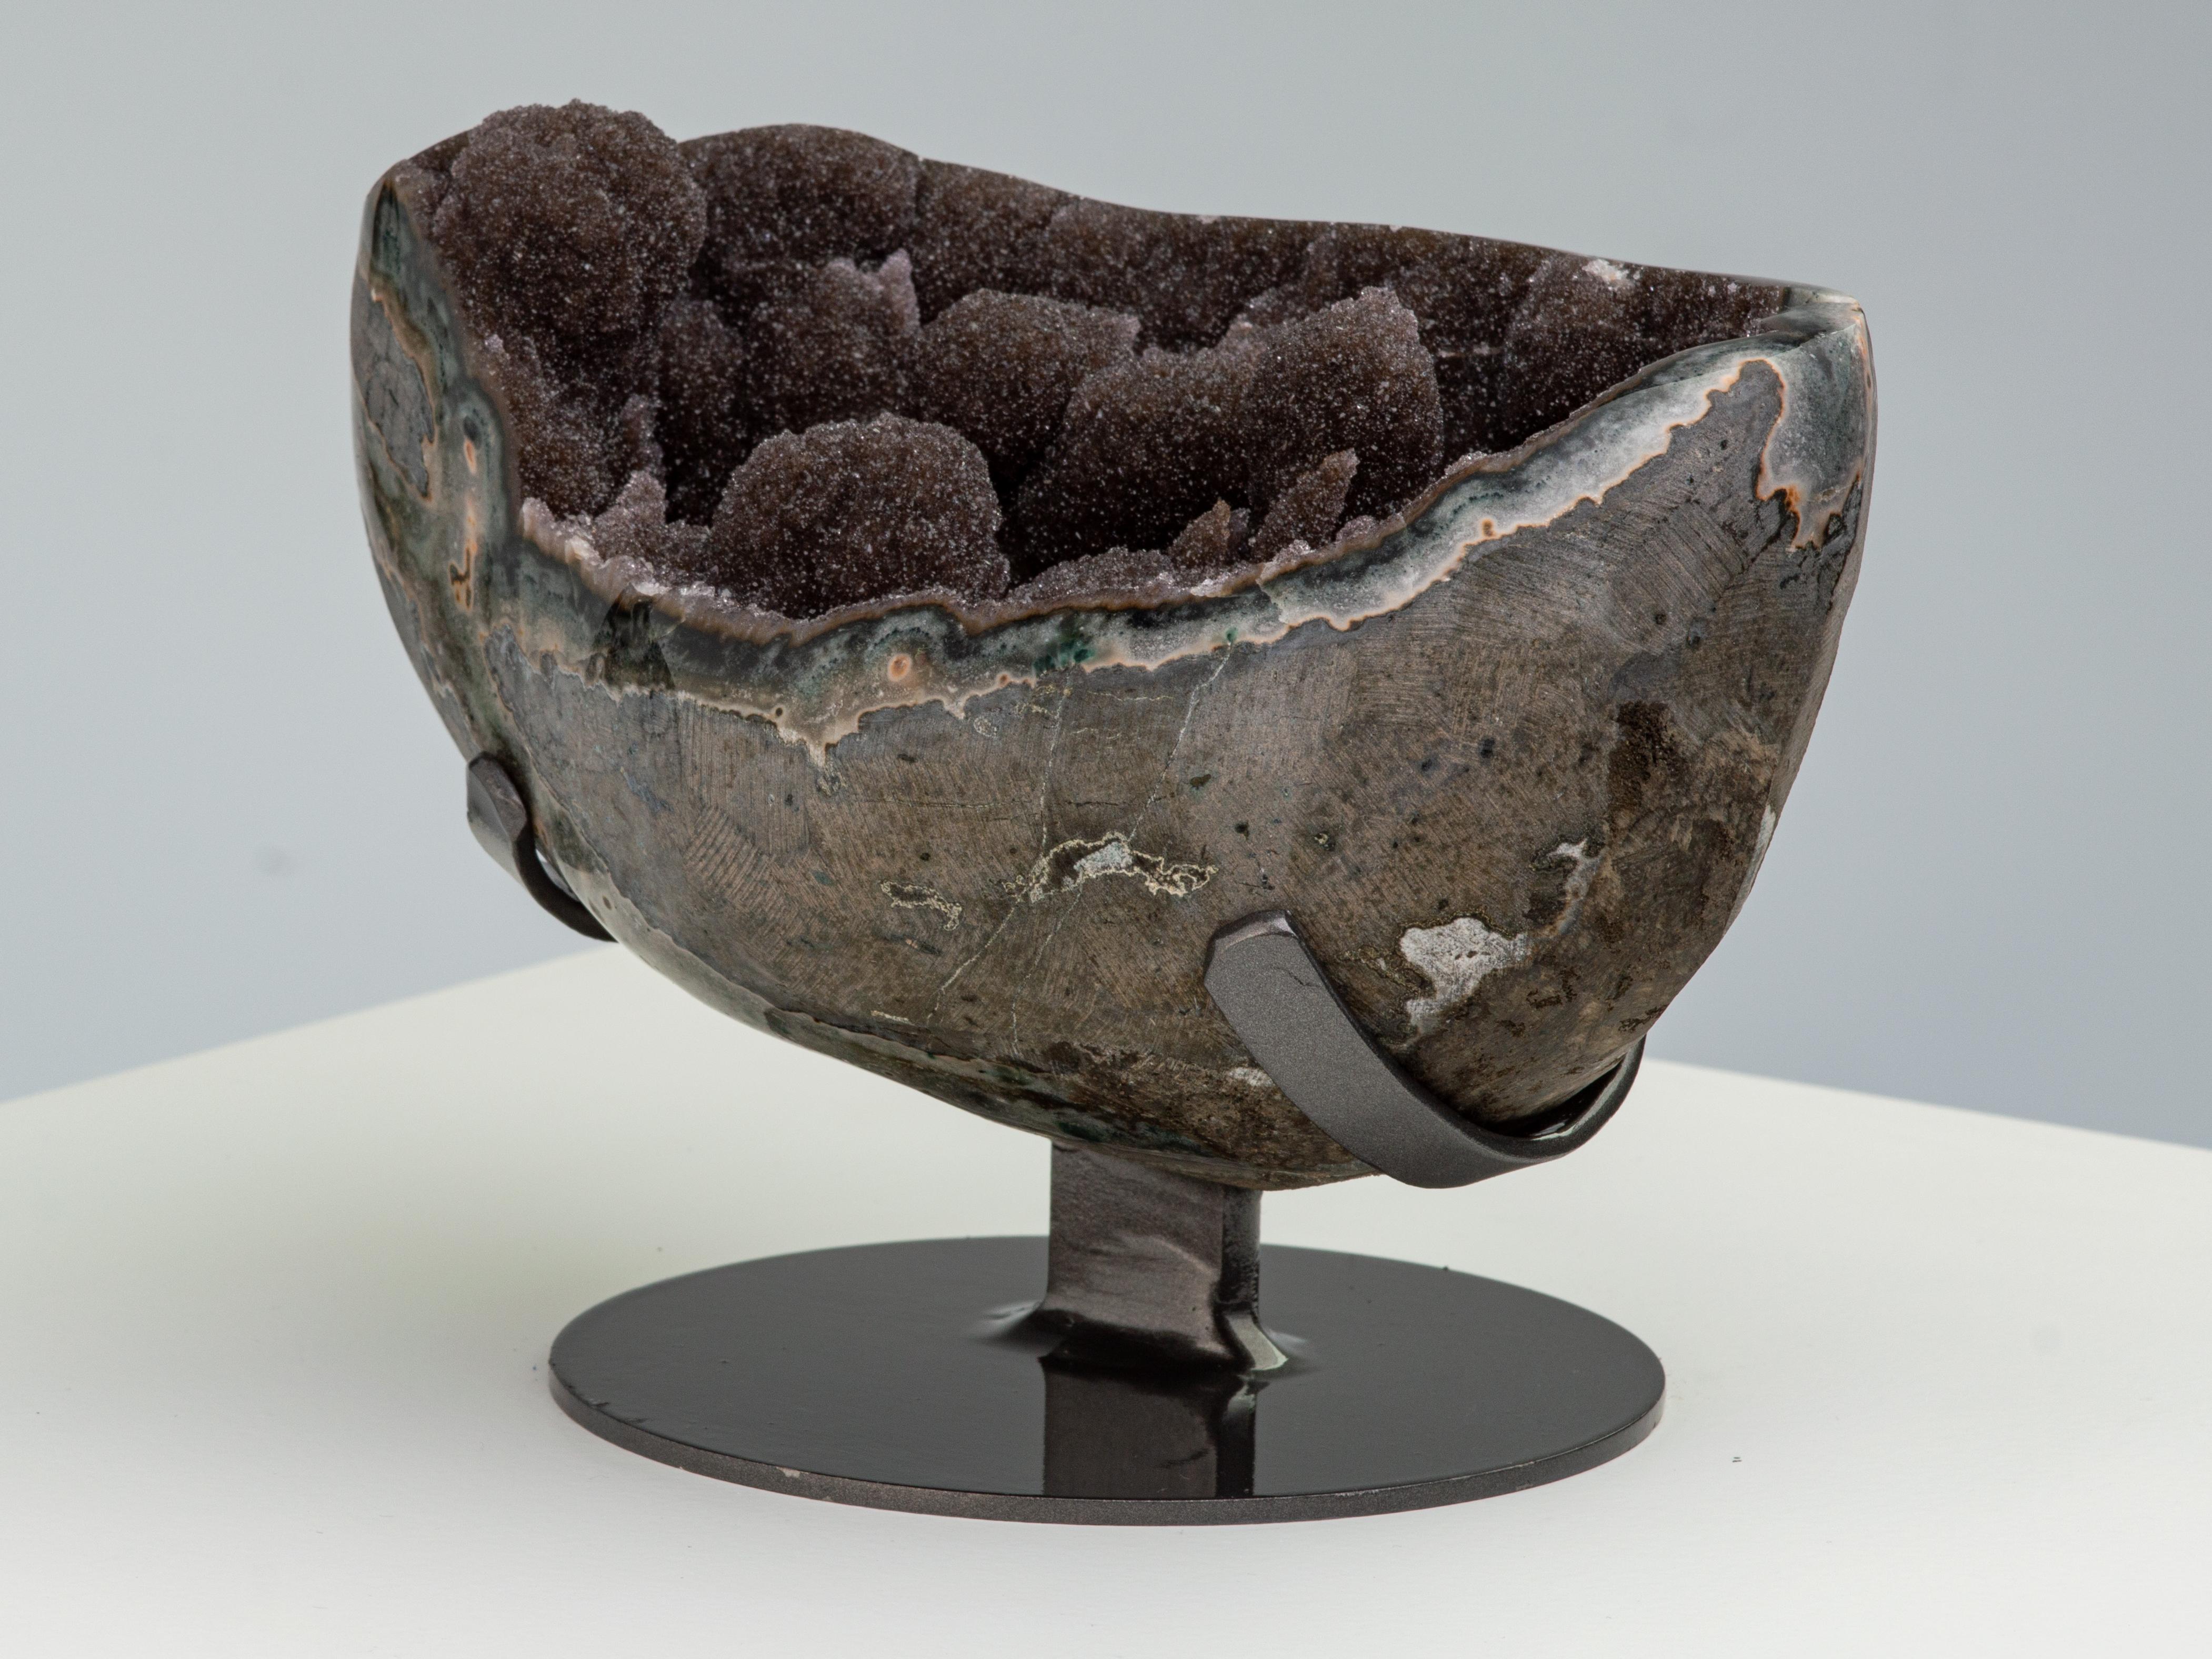 18th Century and Earlier Small Geode with Brown Druzy Stalactites